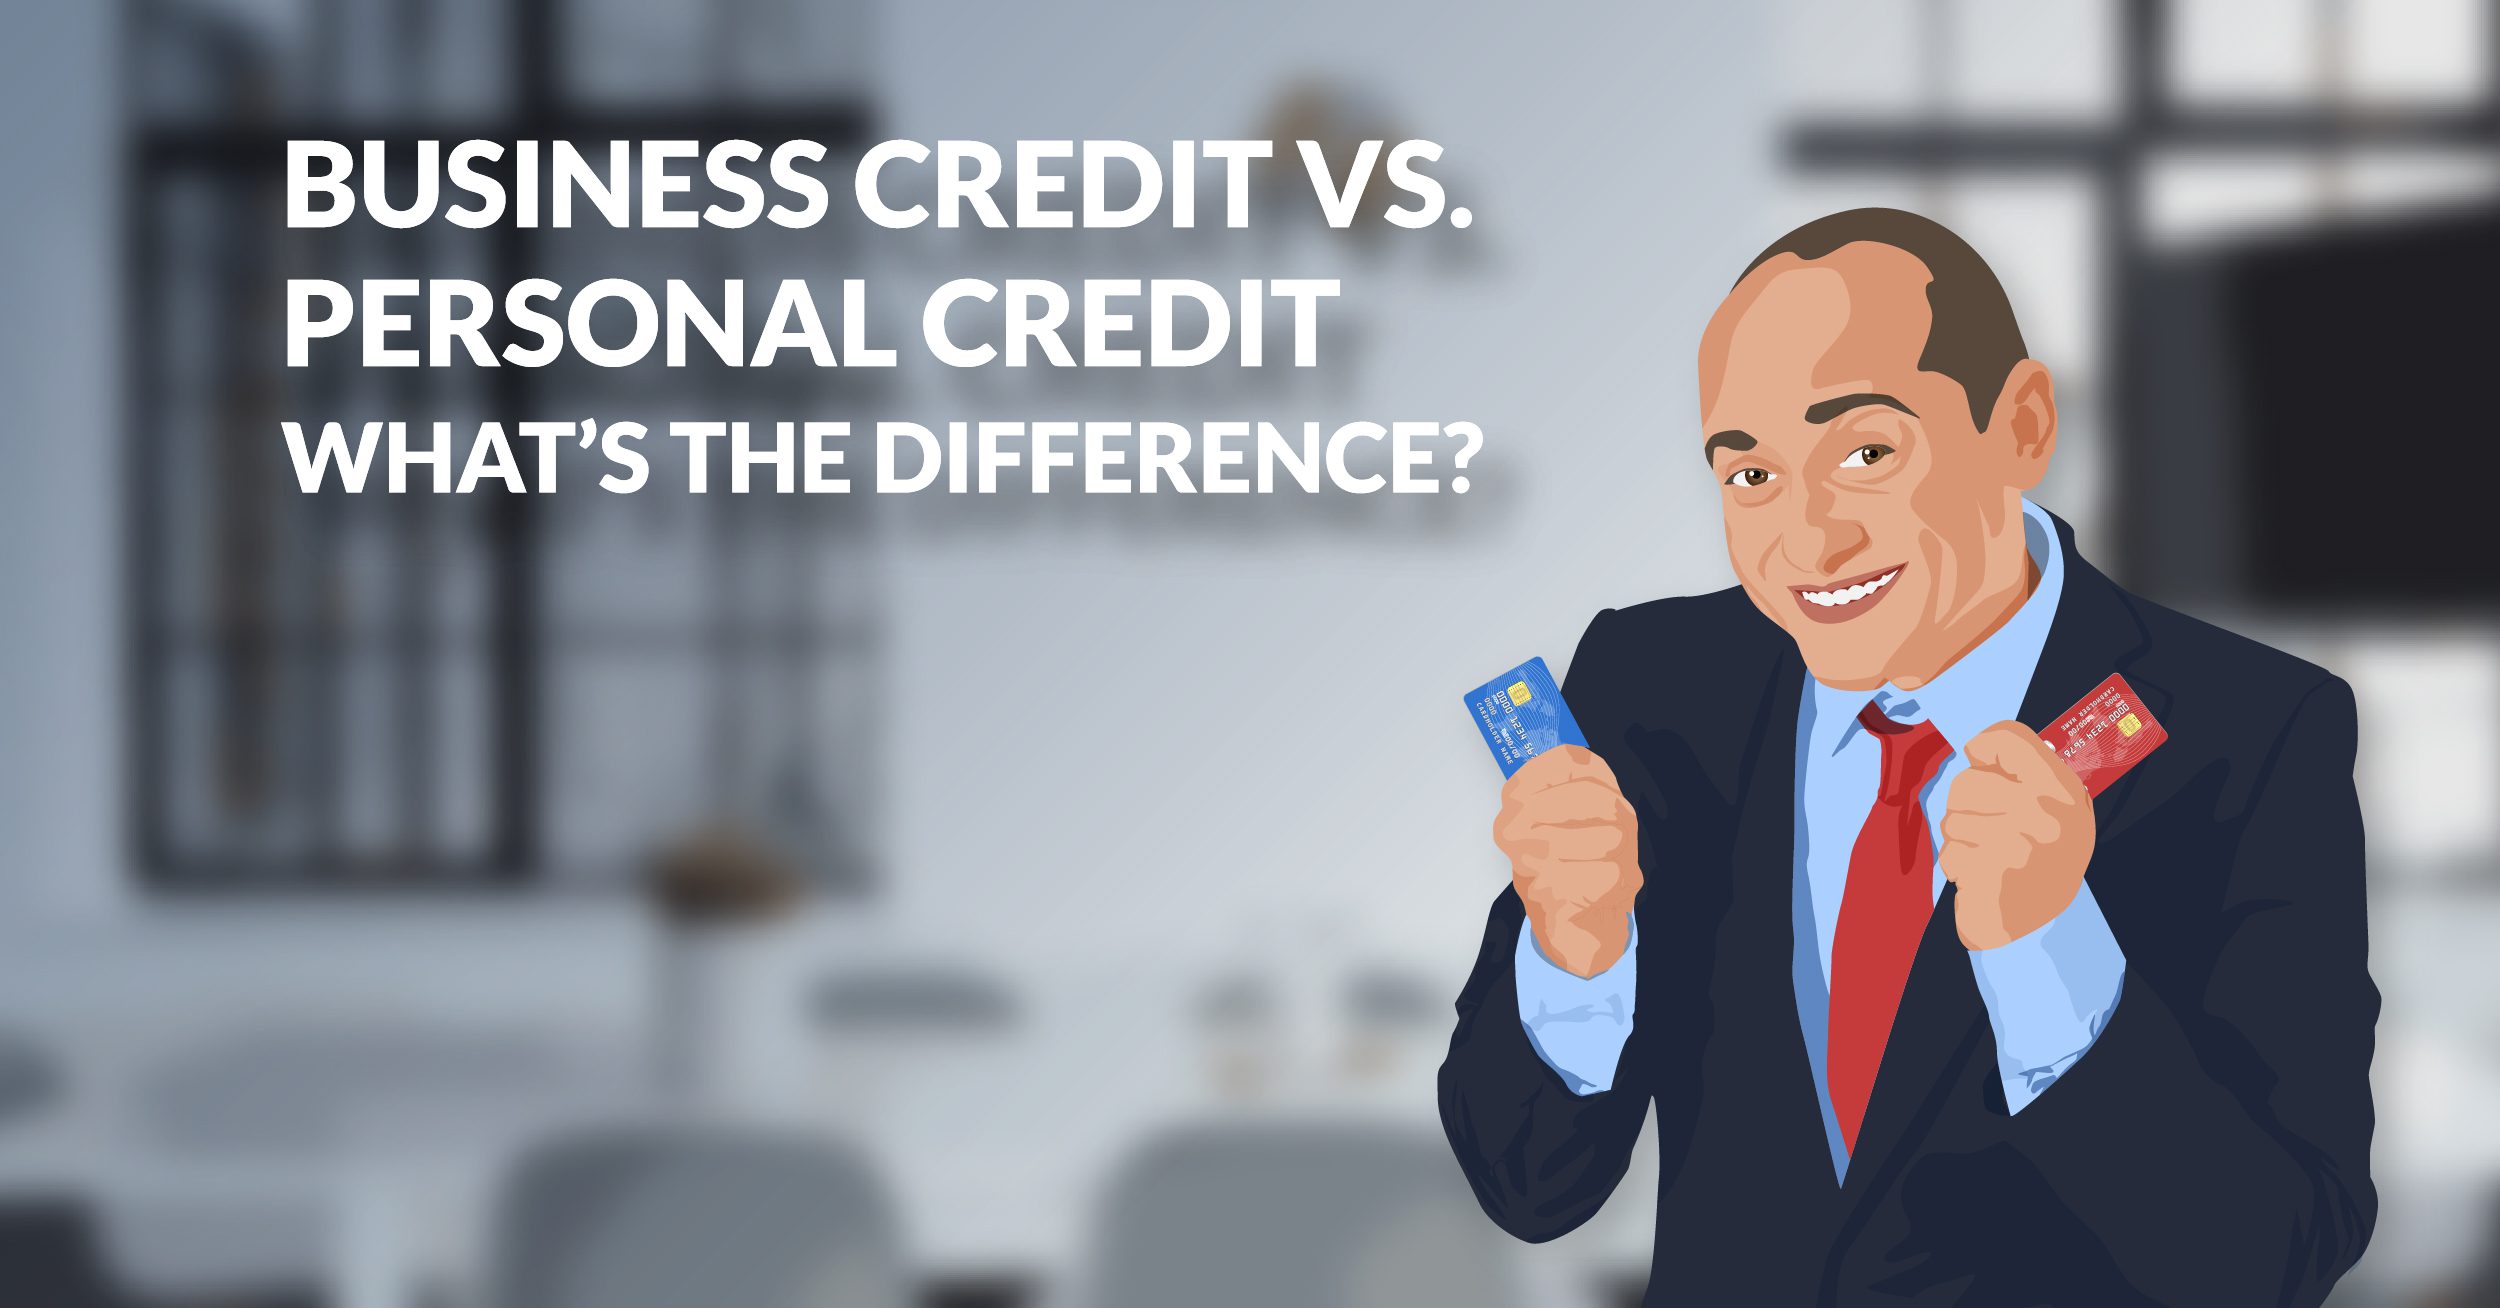 Business Credit vs. Personal Credit - What’s the Difference